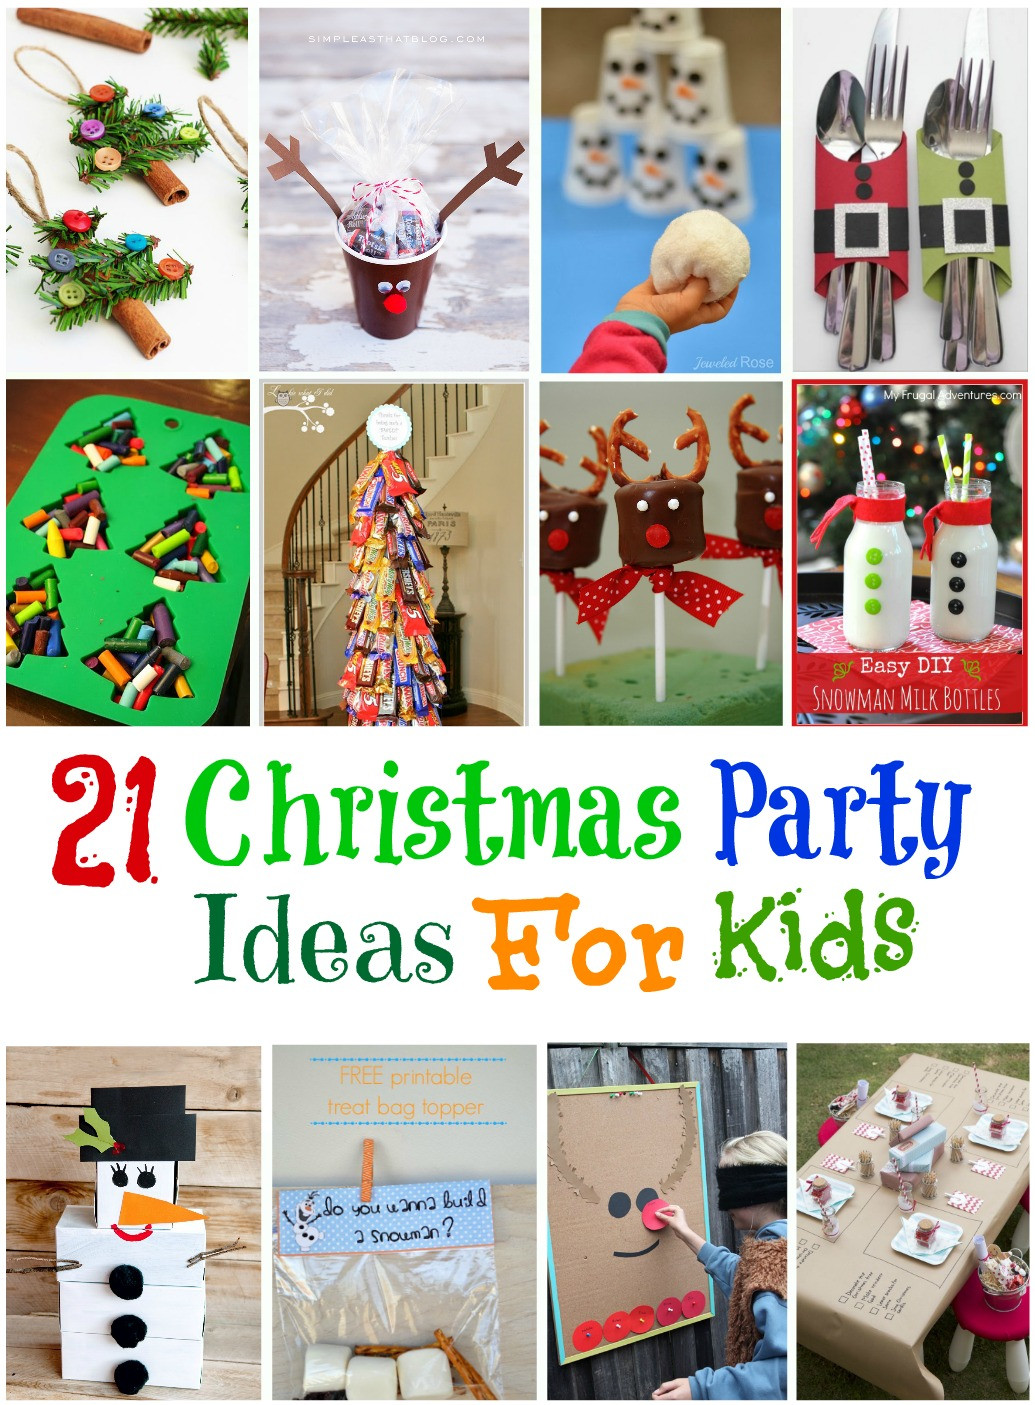 Ideas For Kids Christmas Party
 20 Frozen Birthday Party Ideas